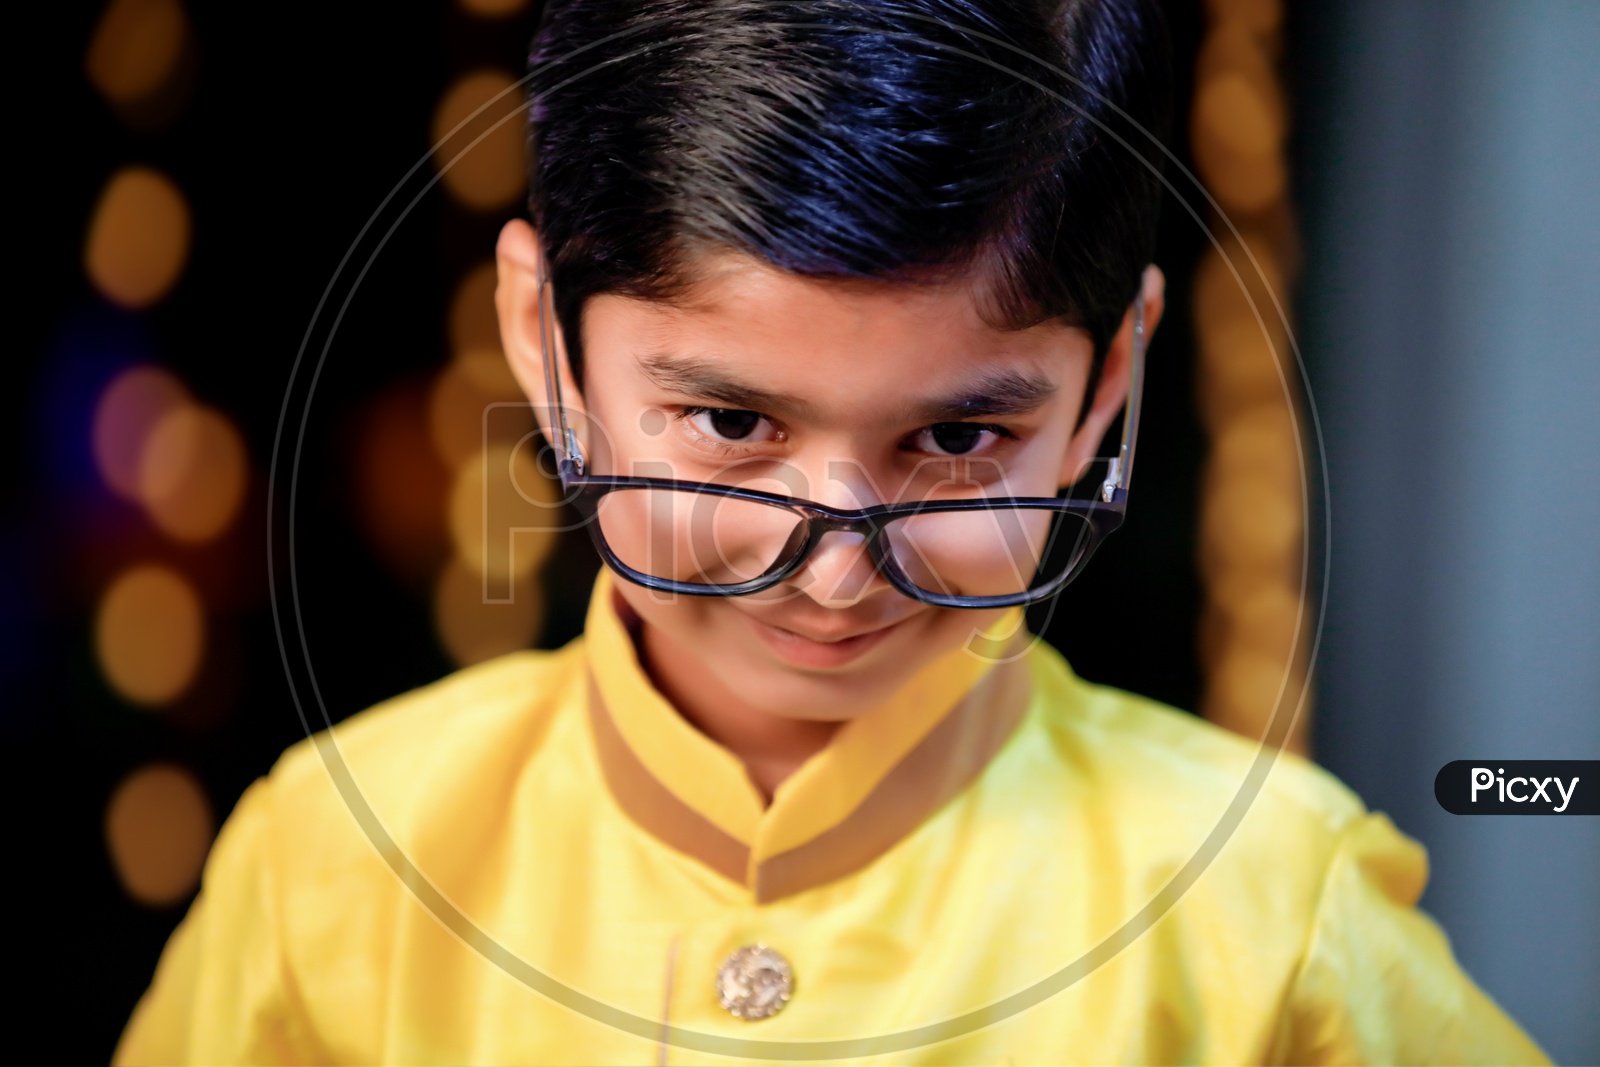 Indian Young Boy Or Kid Or Child Wearing Spectacles and Posing